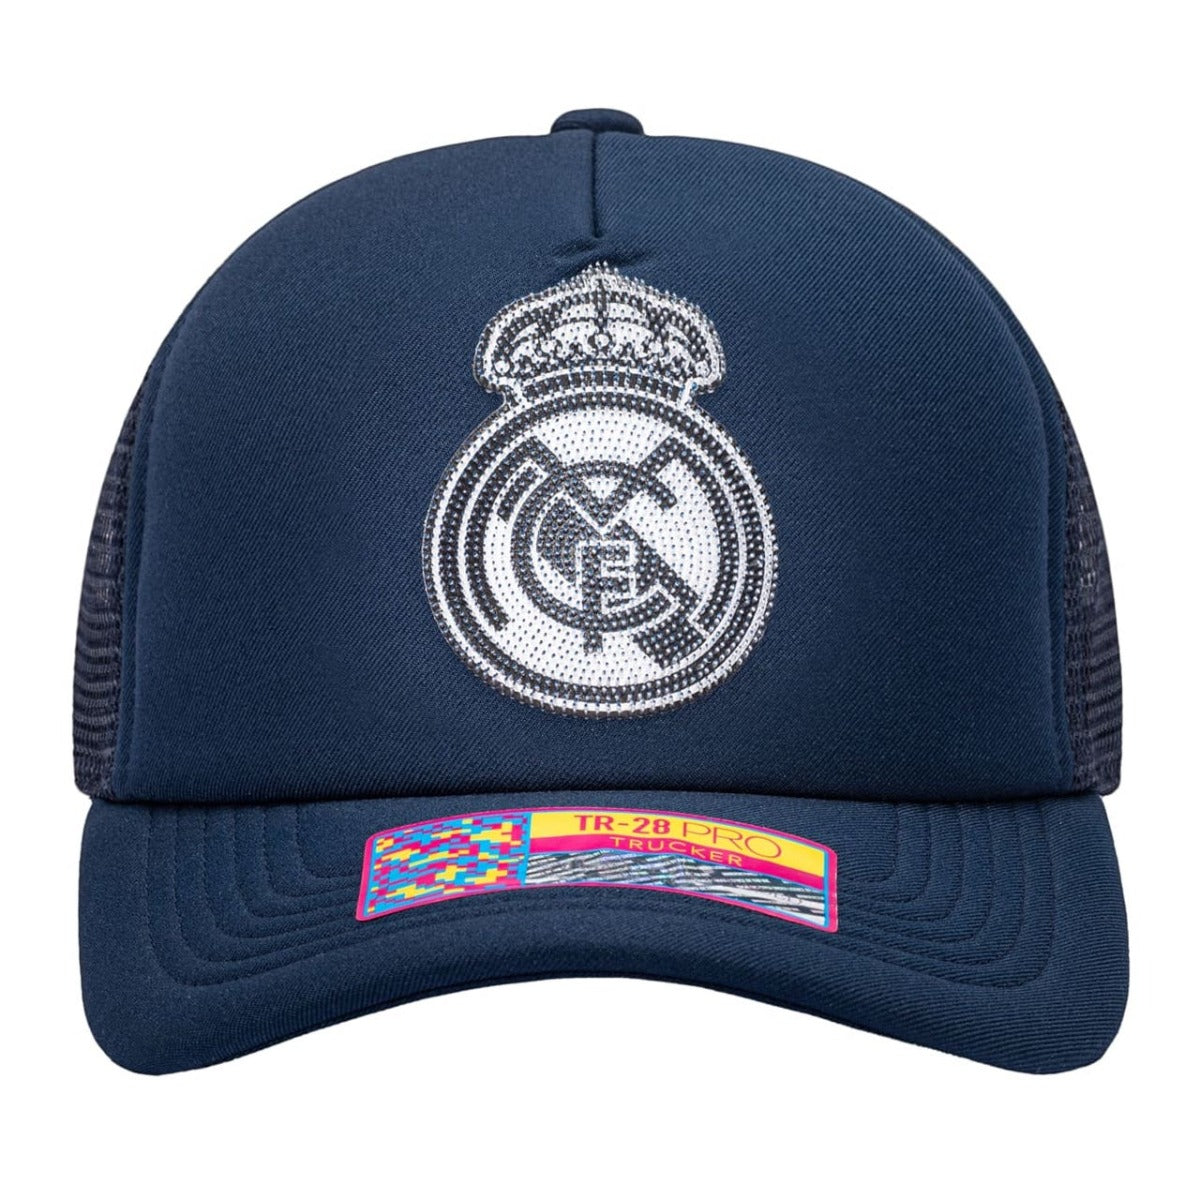 FI Collection Real Madrid Shield Trucker Hat - Navy (Front)